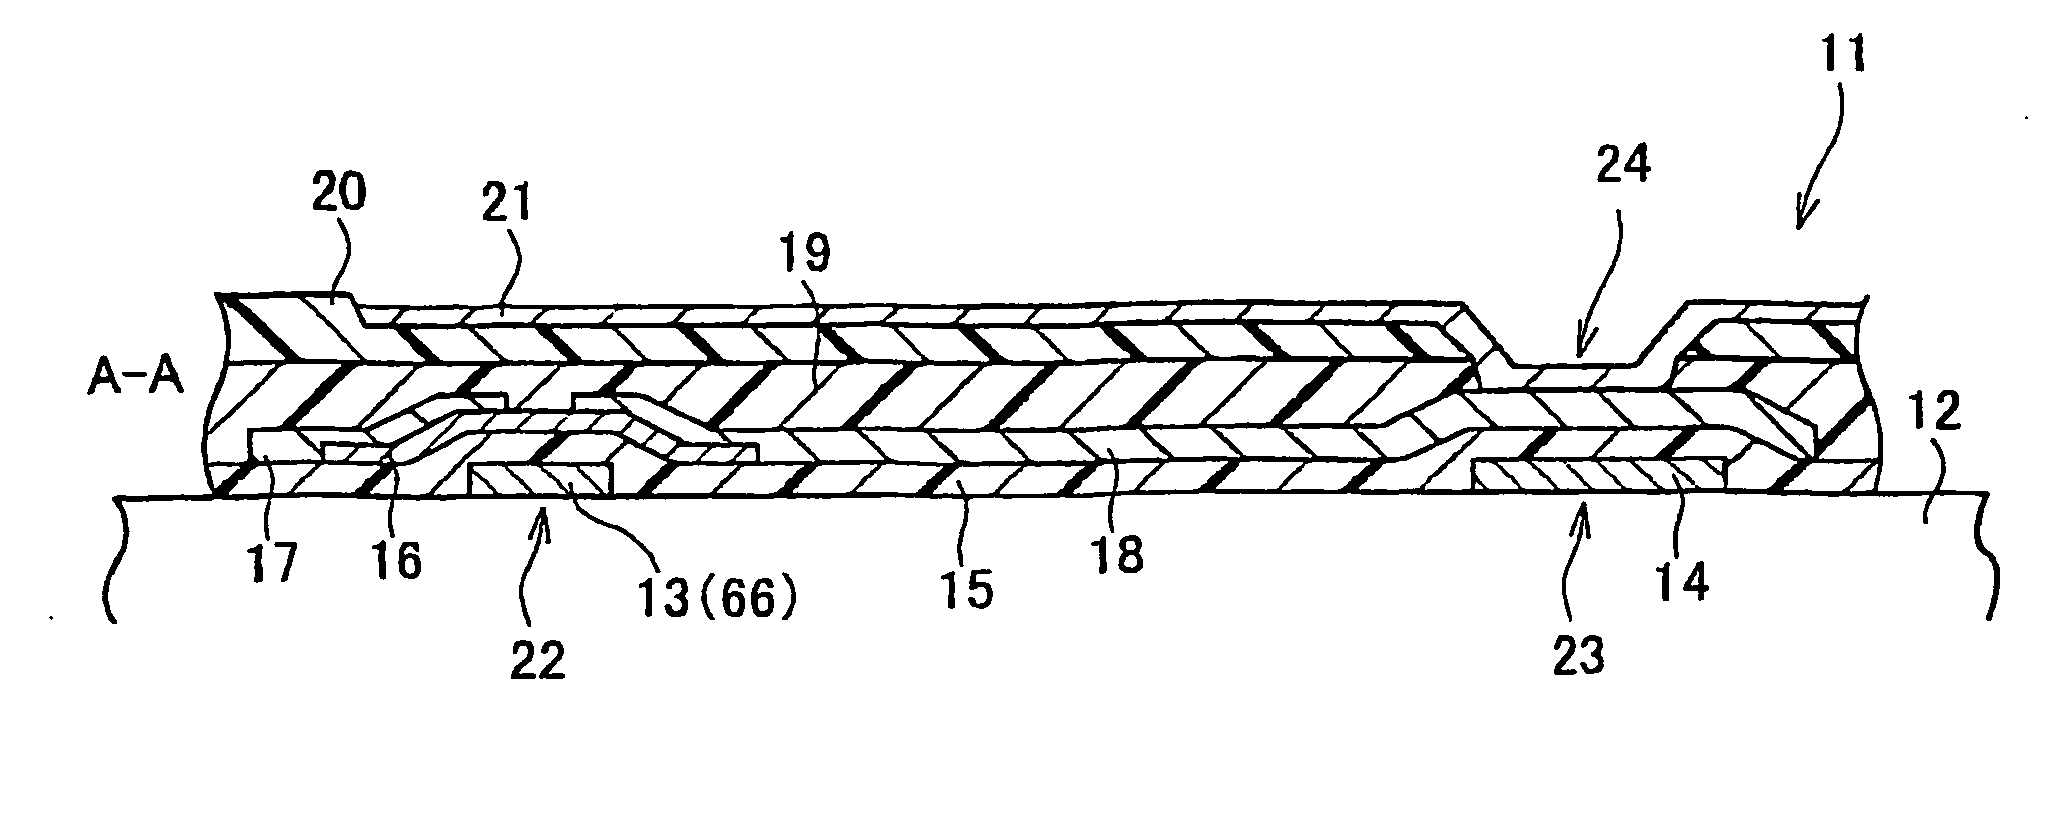 Tft array substrate, liquid crystal display device, manufacturing methods of tft array substrate and liquid crystal display device, and electronic device